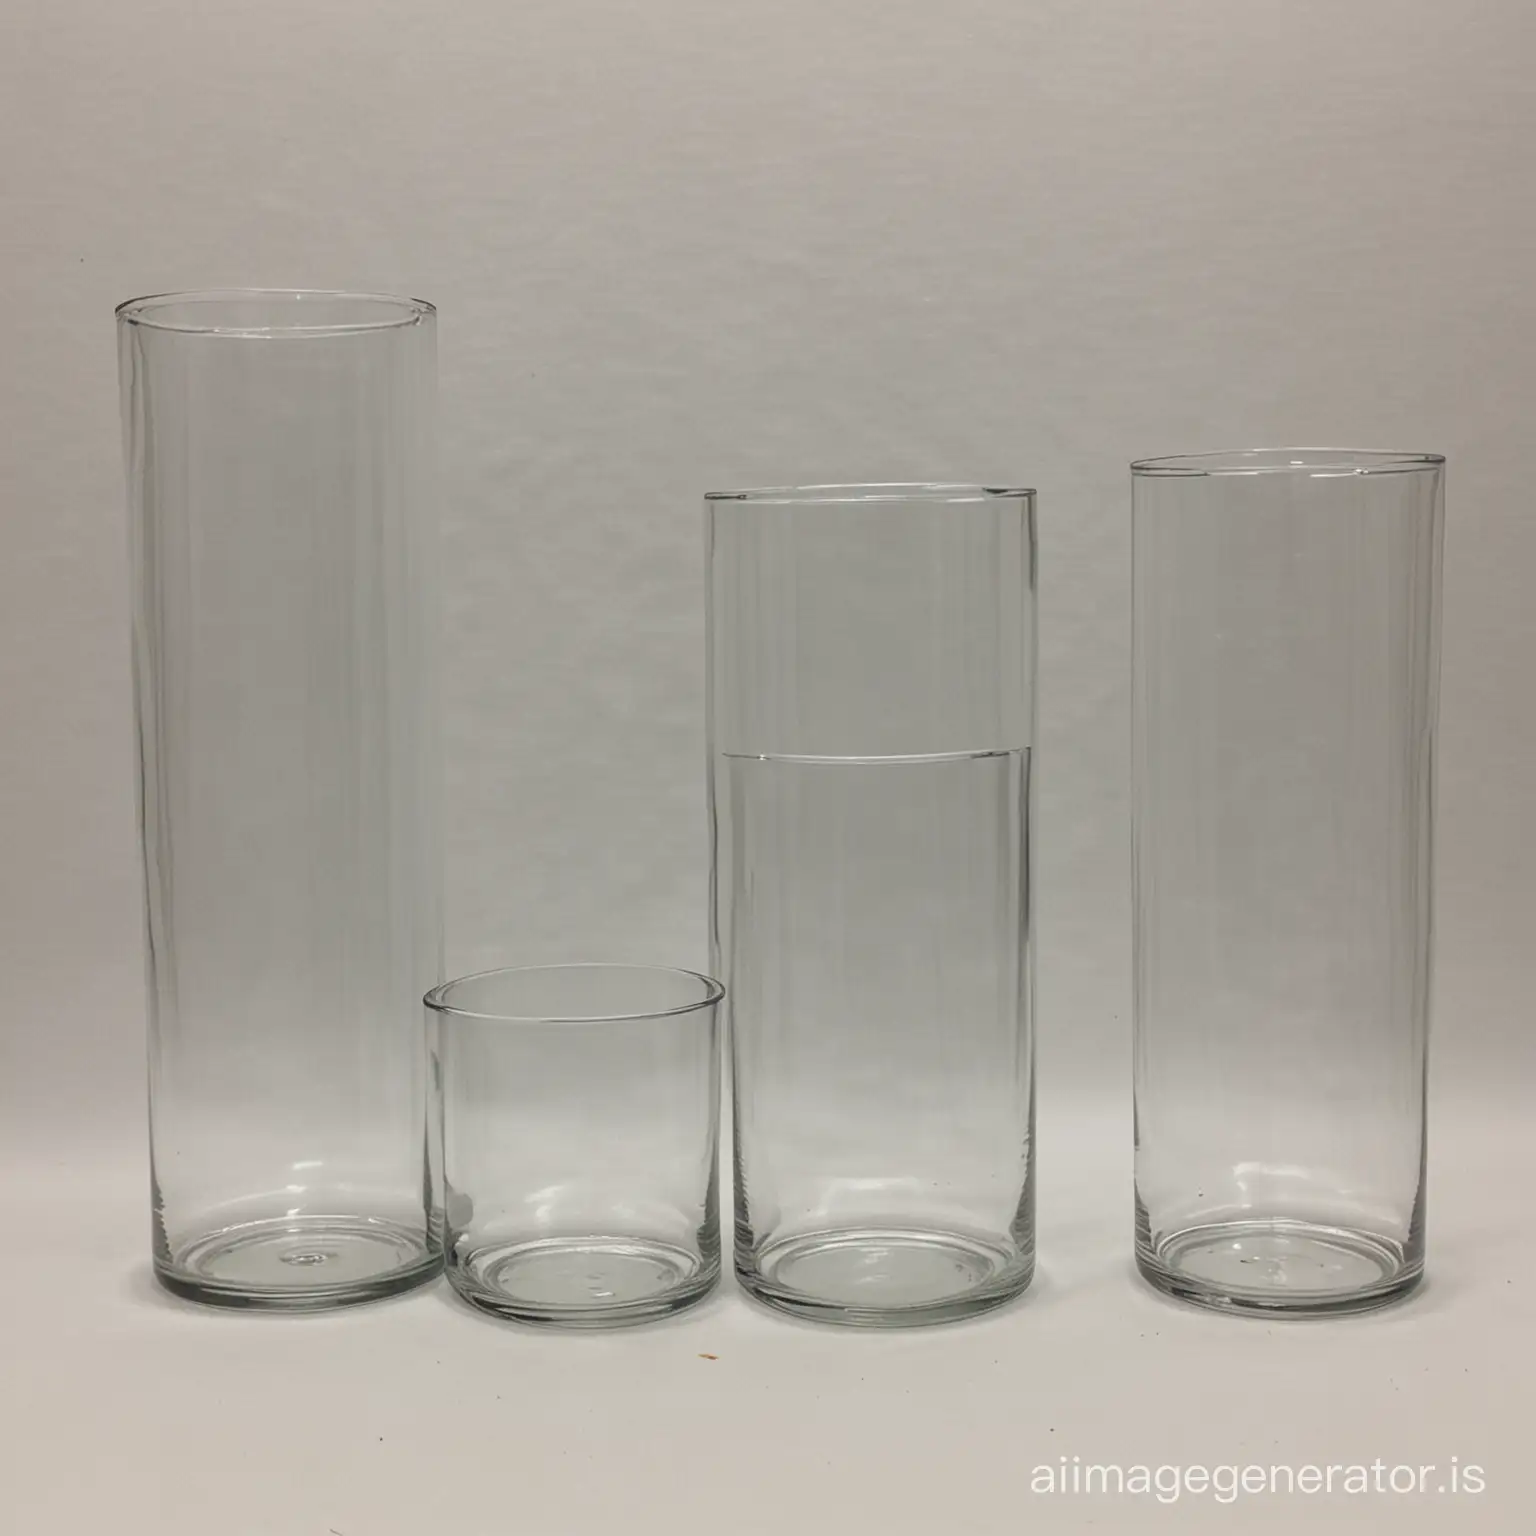 several clear glass cylinder vases of varying heights, all are about 3" wide and range from 3" tall to 24" tall and all vases are empty